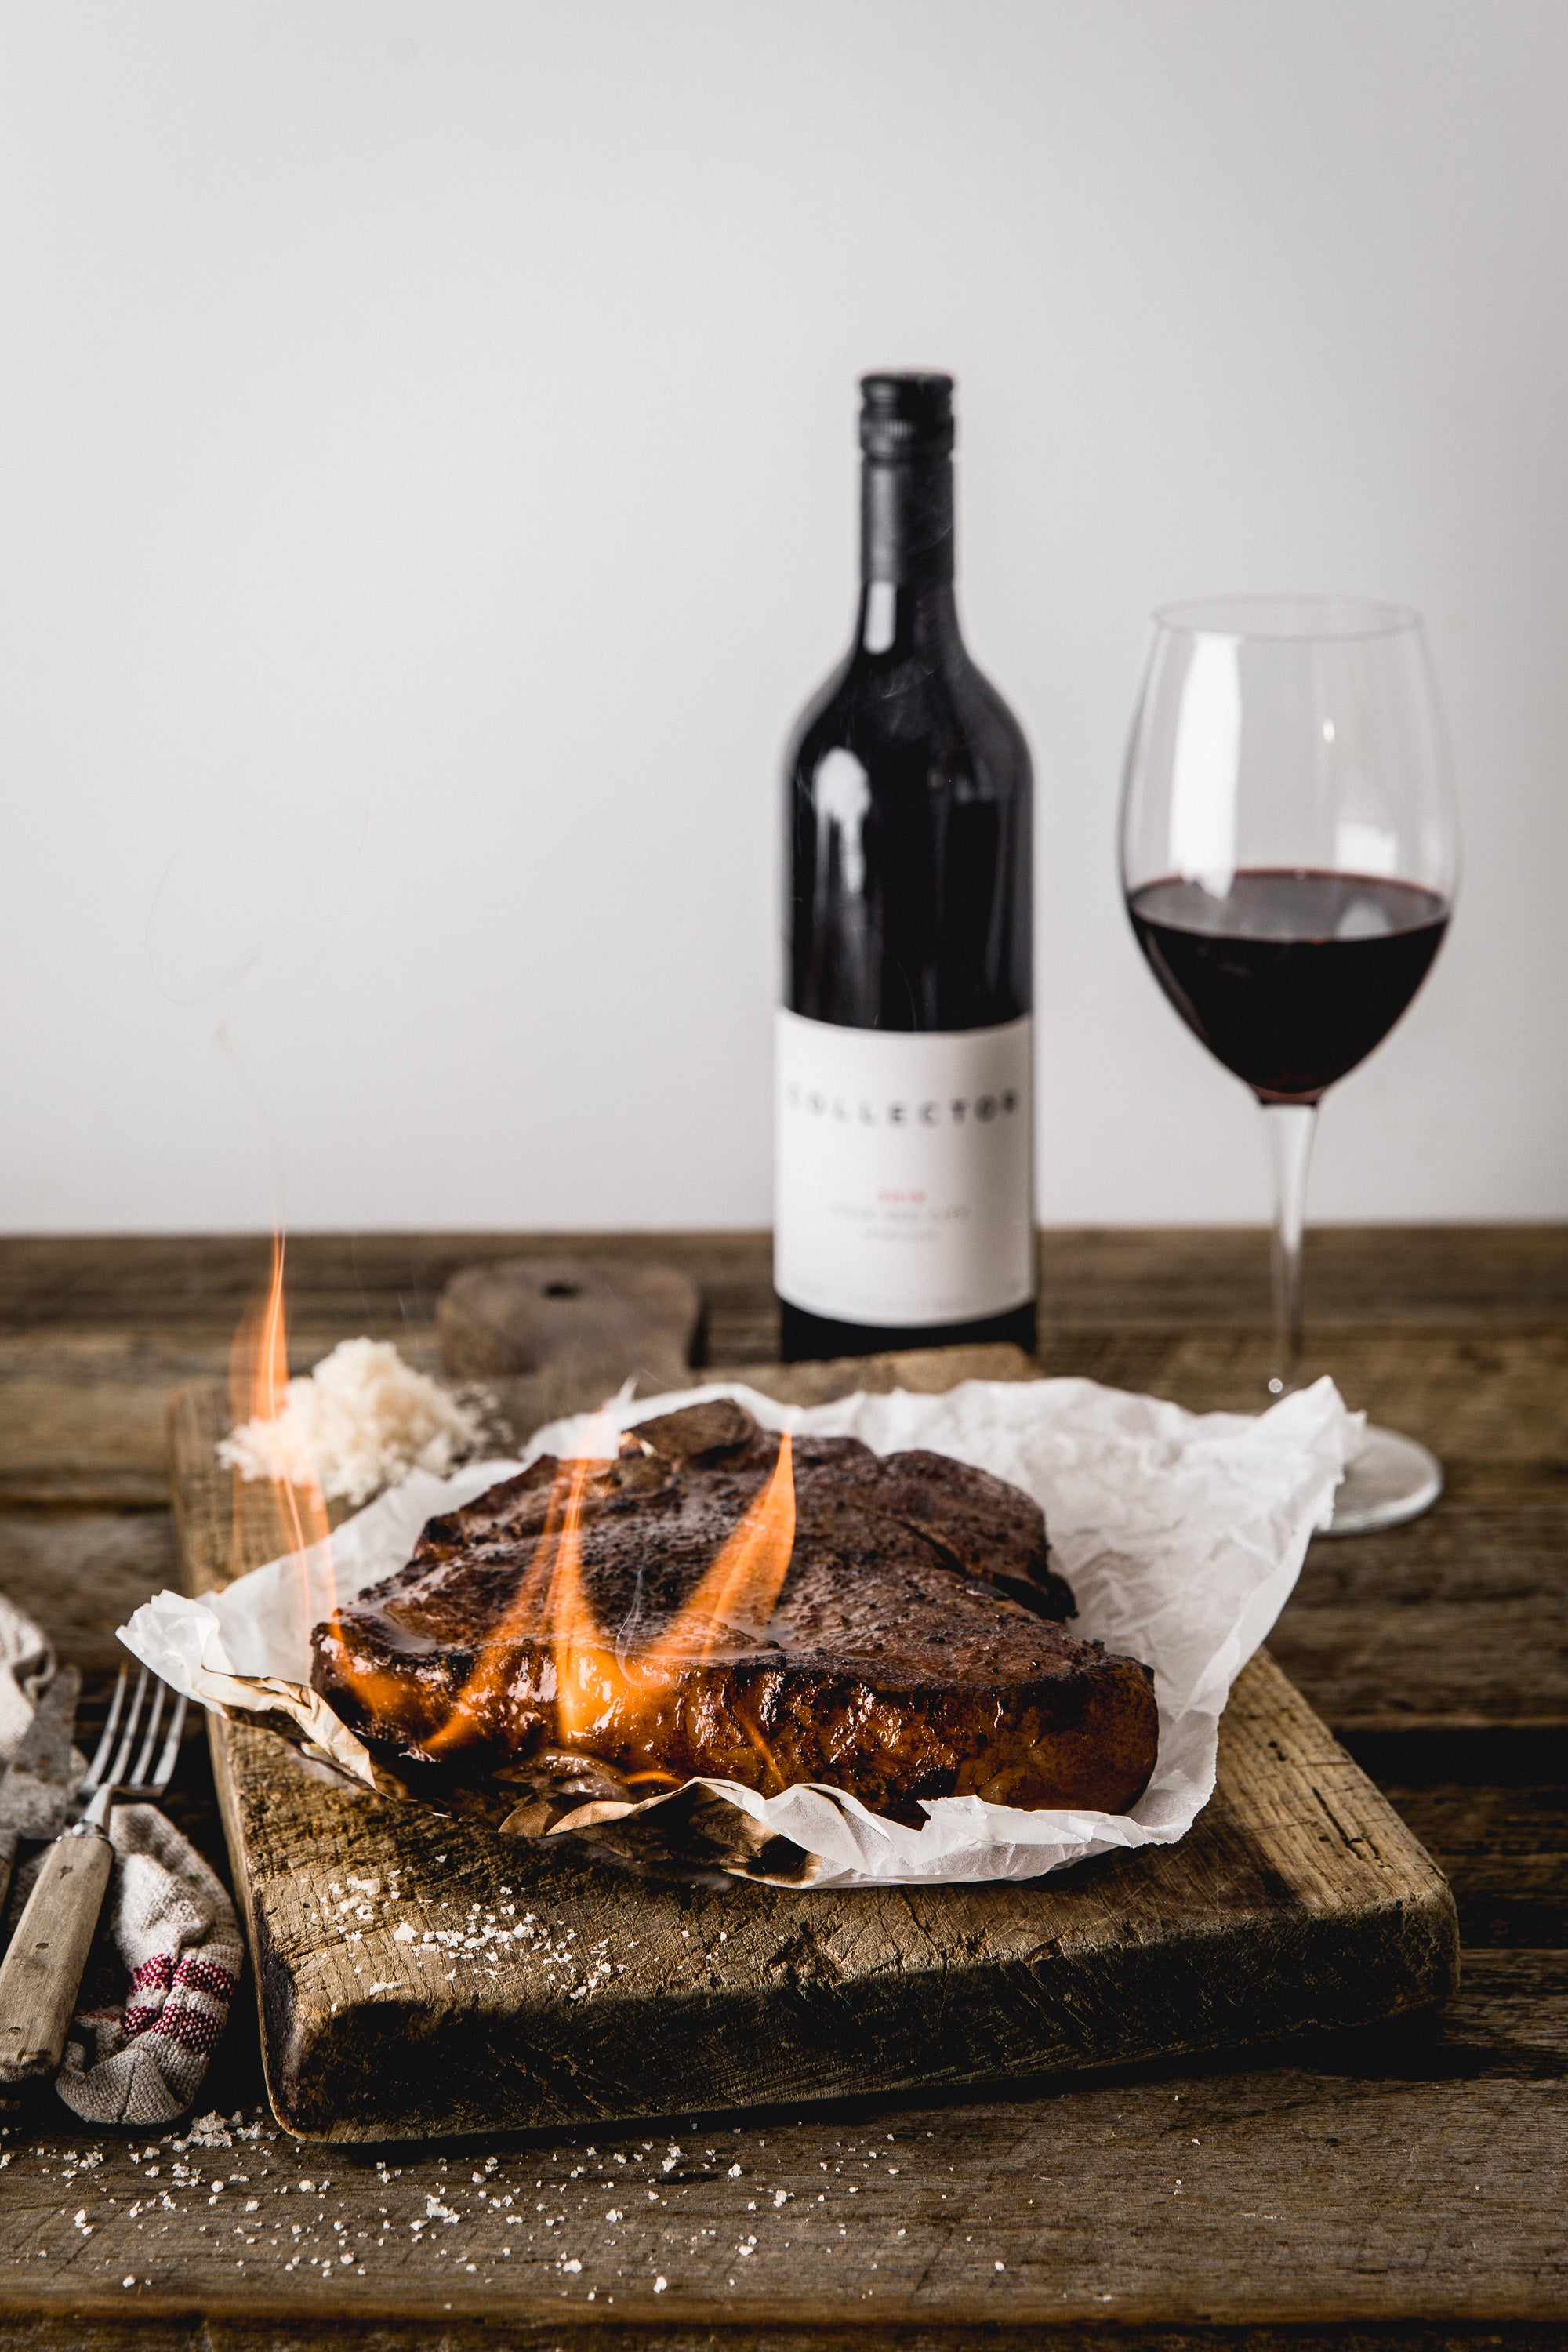 A T-bone steak, grilled and with flames still licking its sides, rests on a rustic wooden board. A bottle and glass of Collector Wines Rose Red City Sangiovese sits in the background.